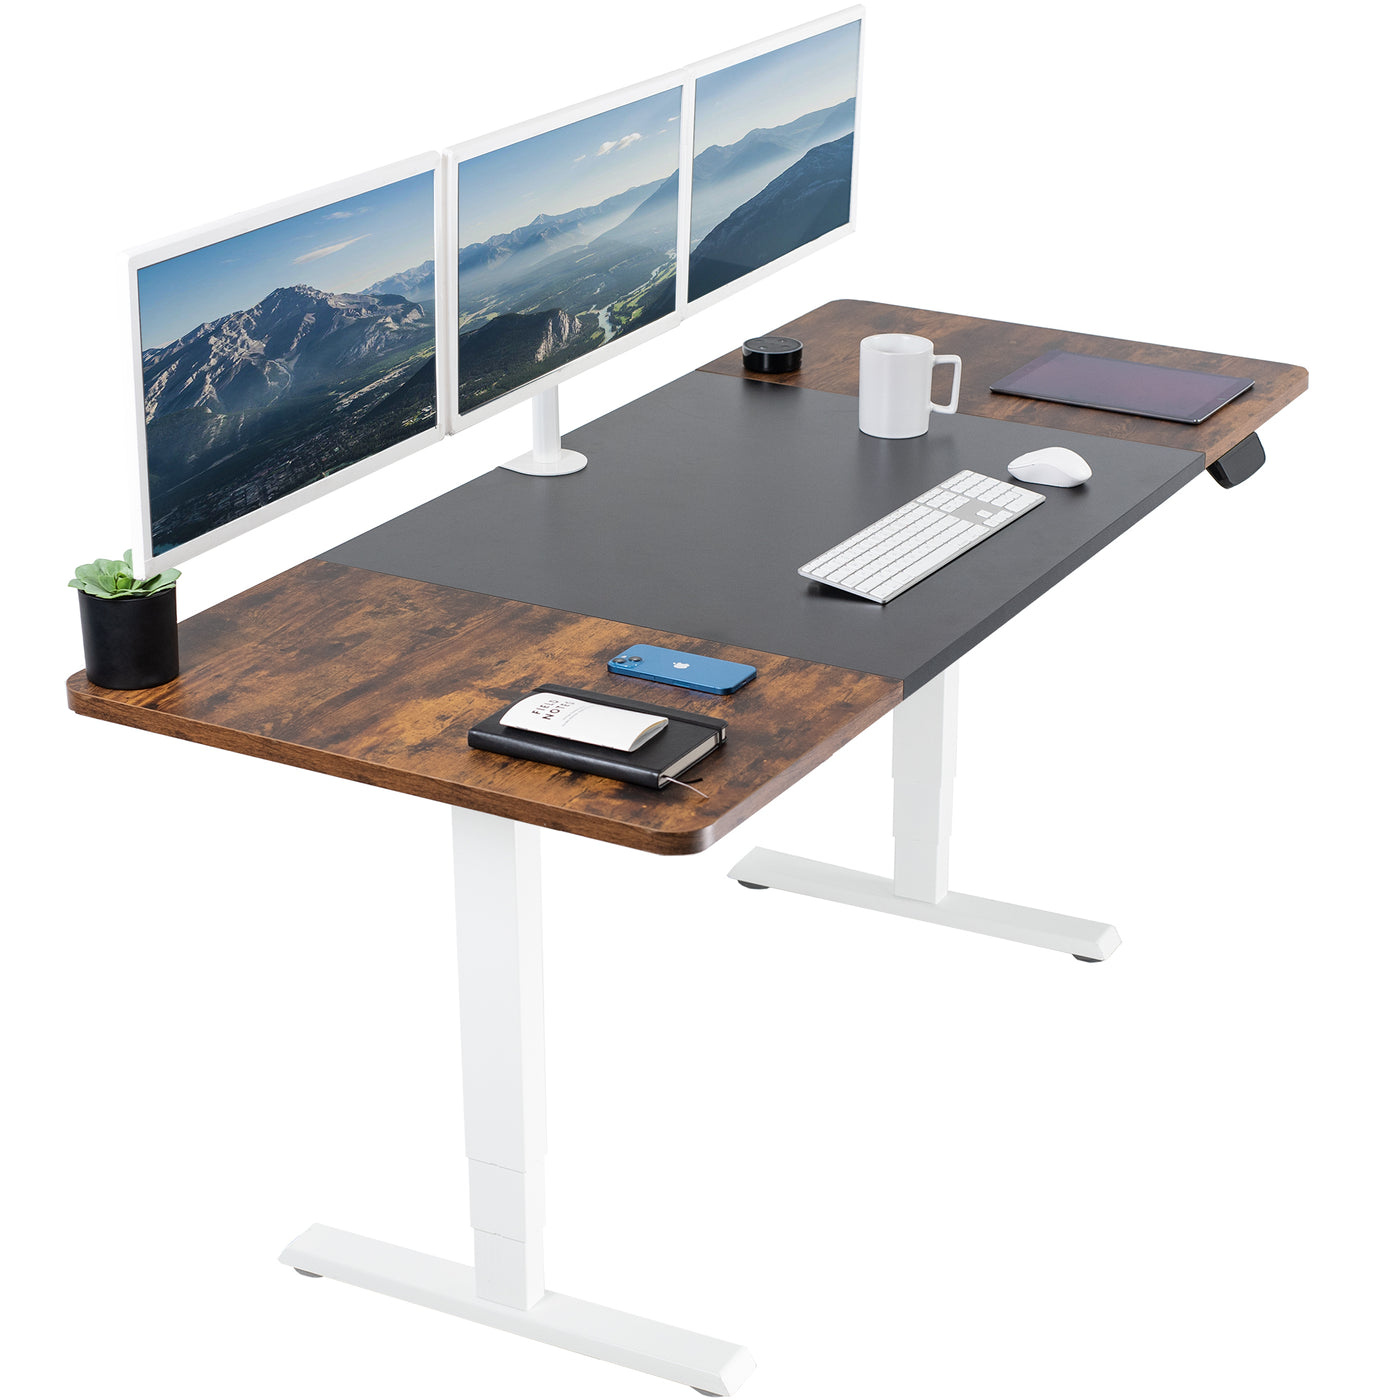 Rustic sturdy sit or stand active workstation with adjustable height using touch screen control panel.